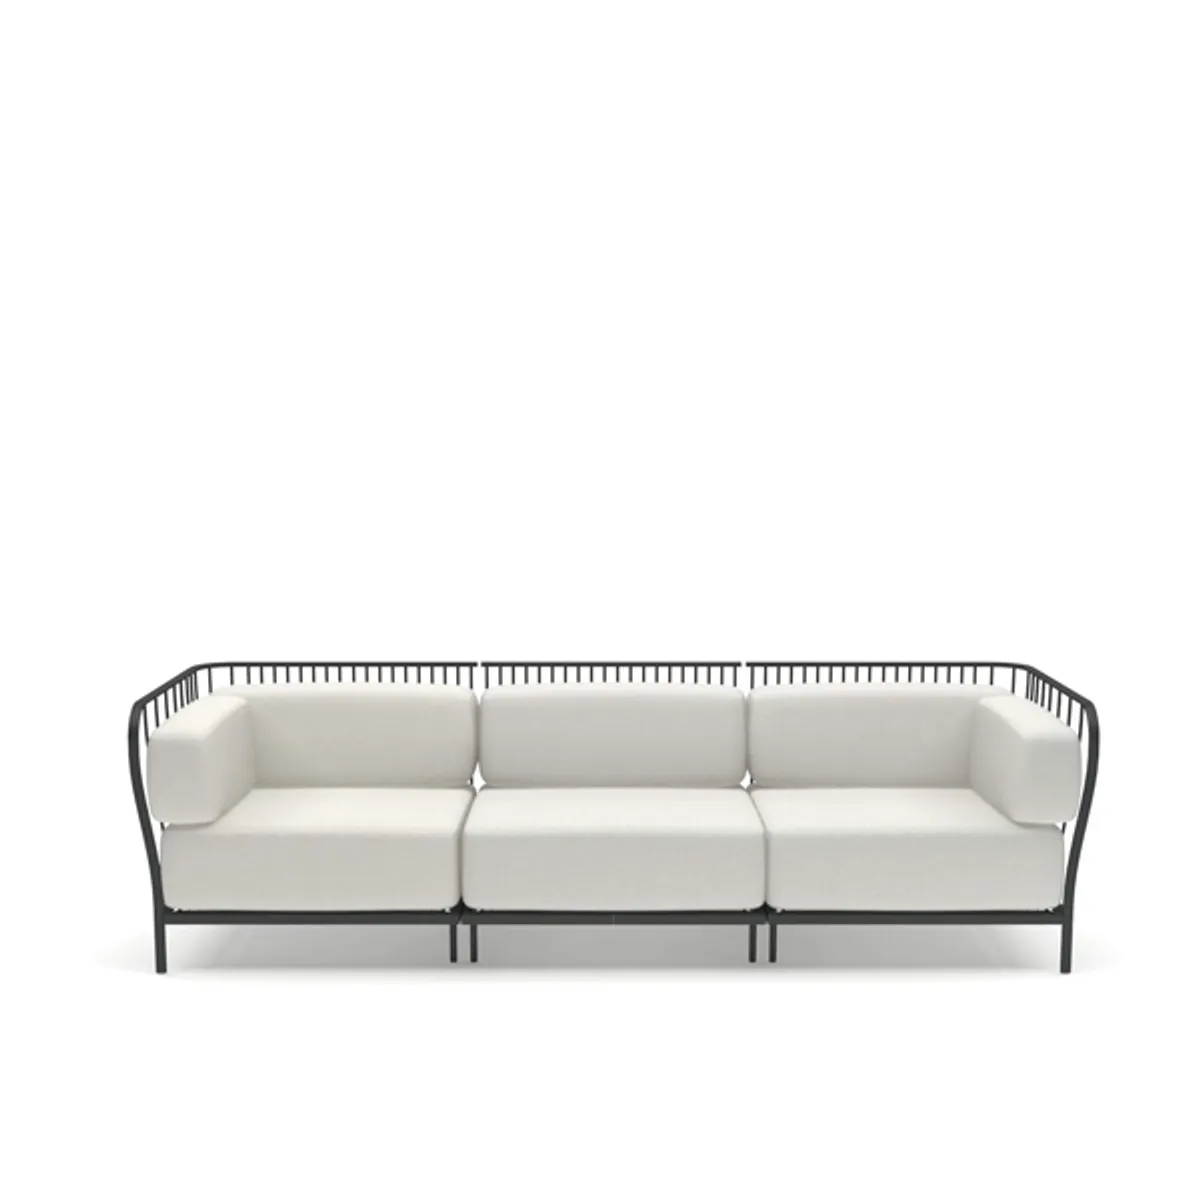 Cannole modular sofa Inside Out Contracts2